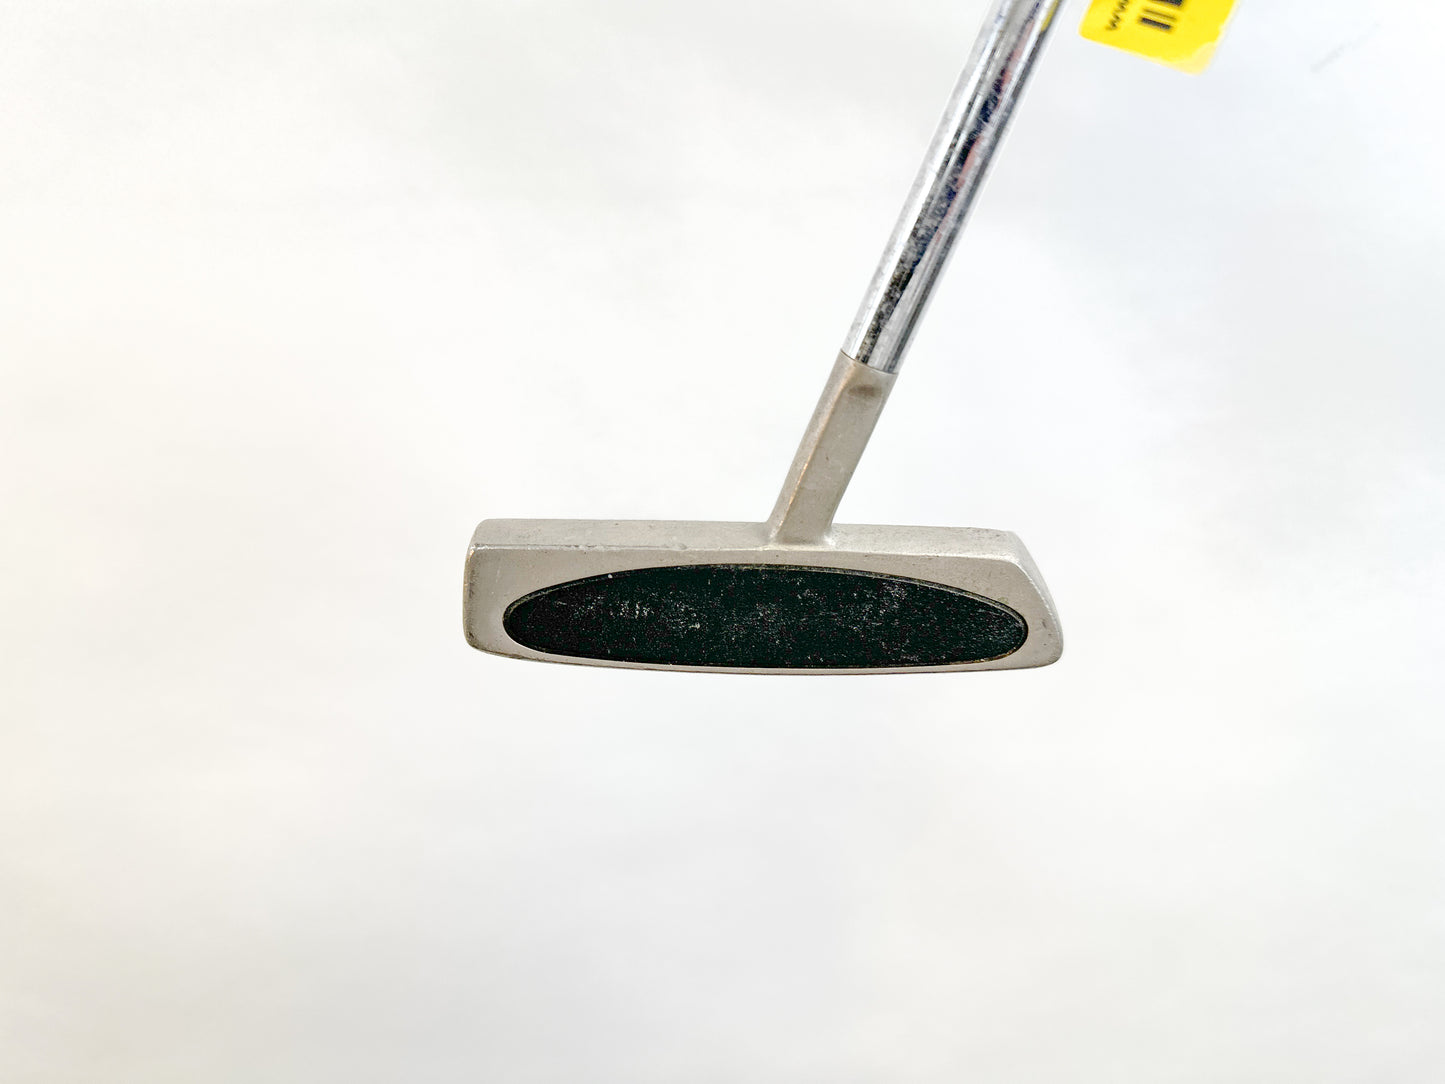 Used TaylorMade TPI-25 Putter - Right-Handed - 34 in - Mid-mallet-Next Round